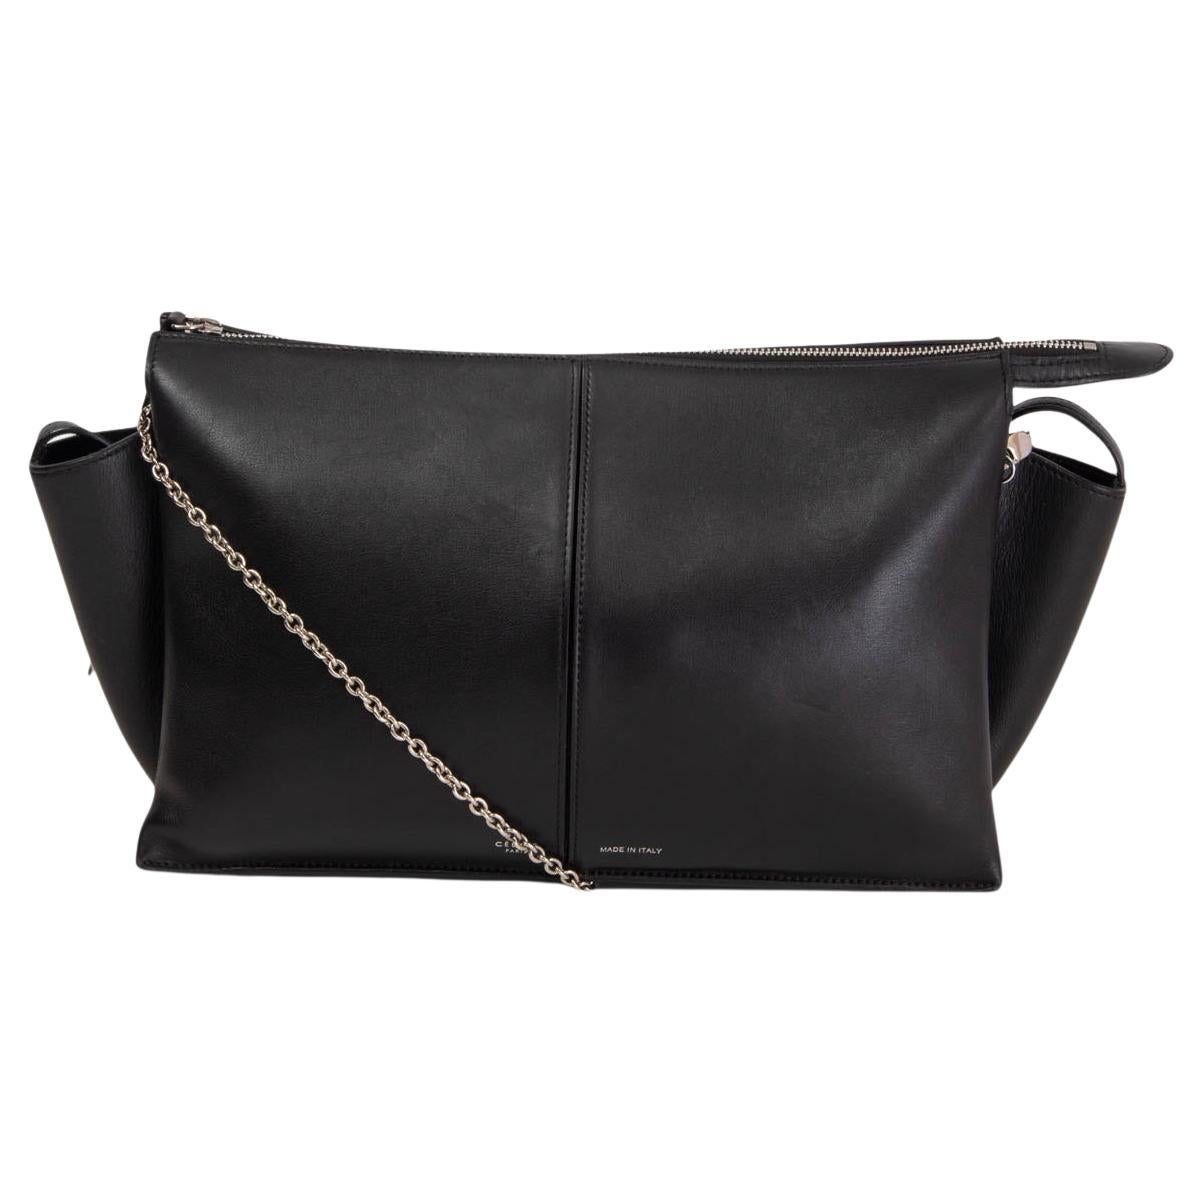 Celine Black Leather Trifold Clutch on Chain Bag